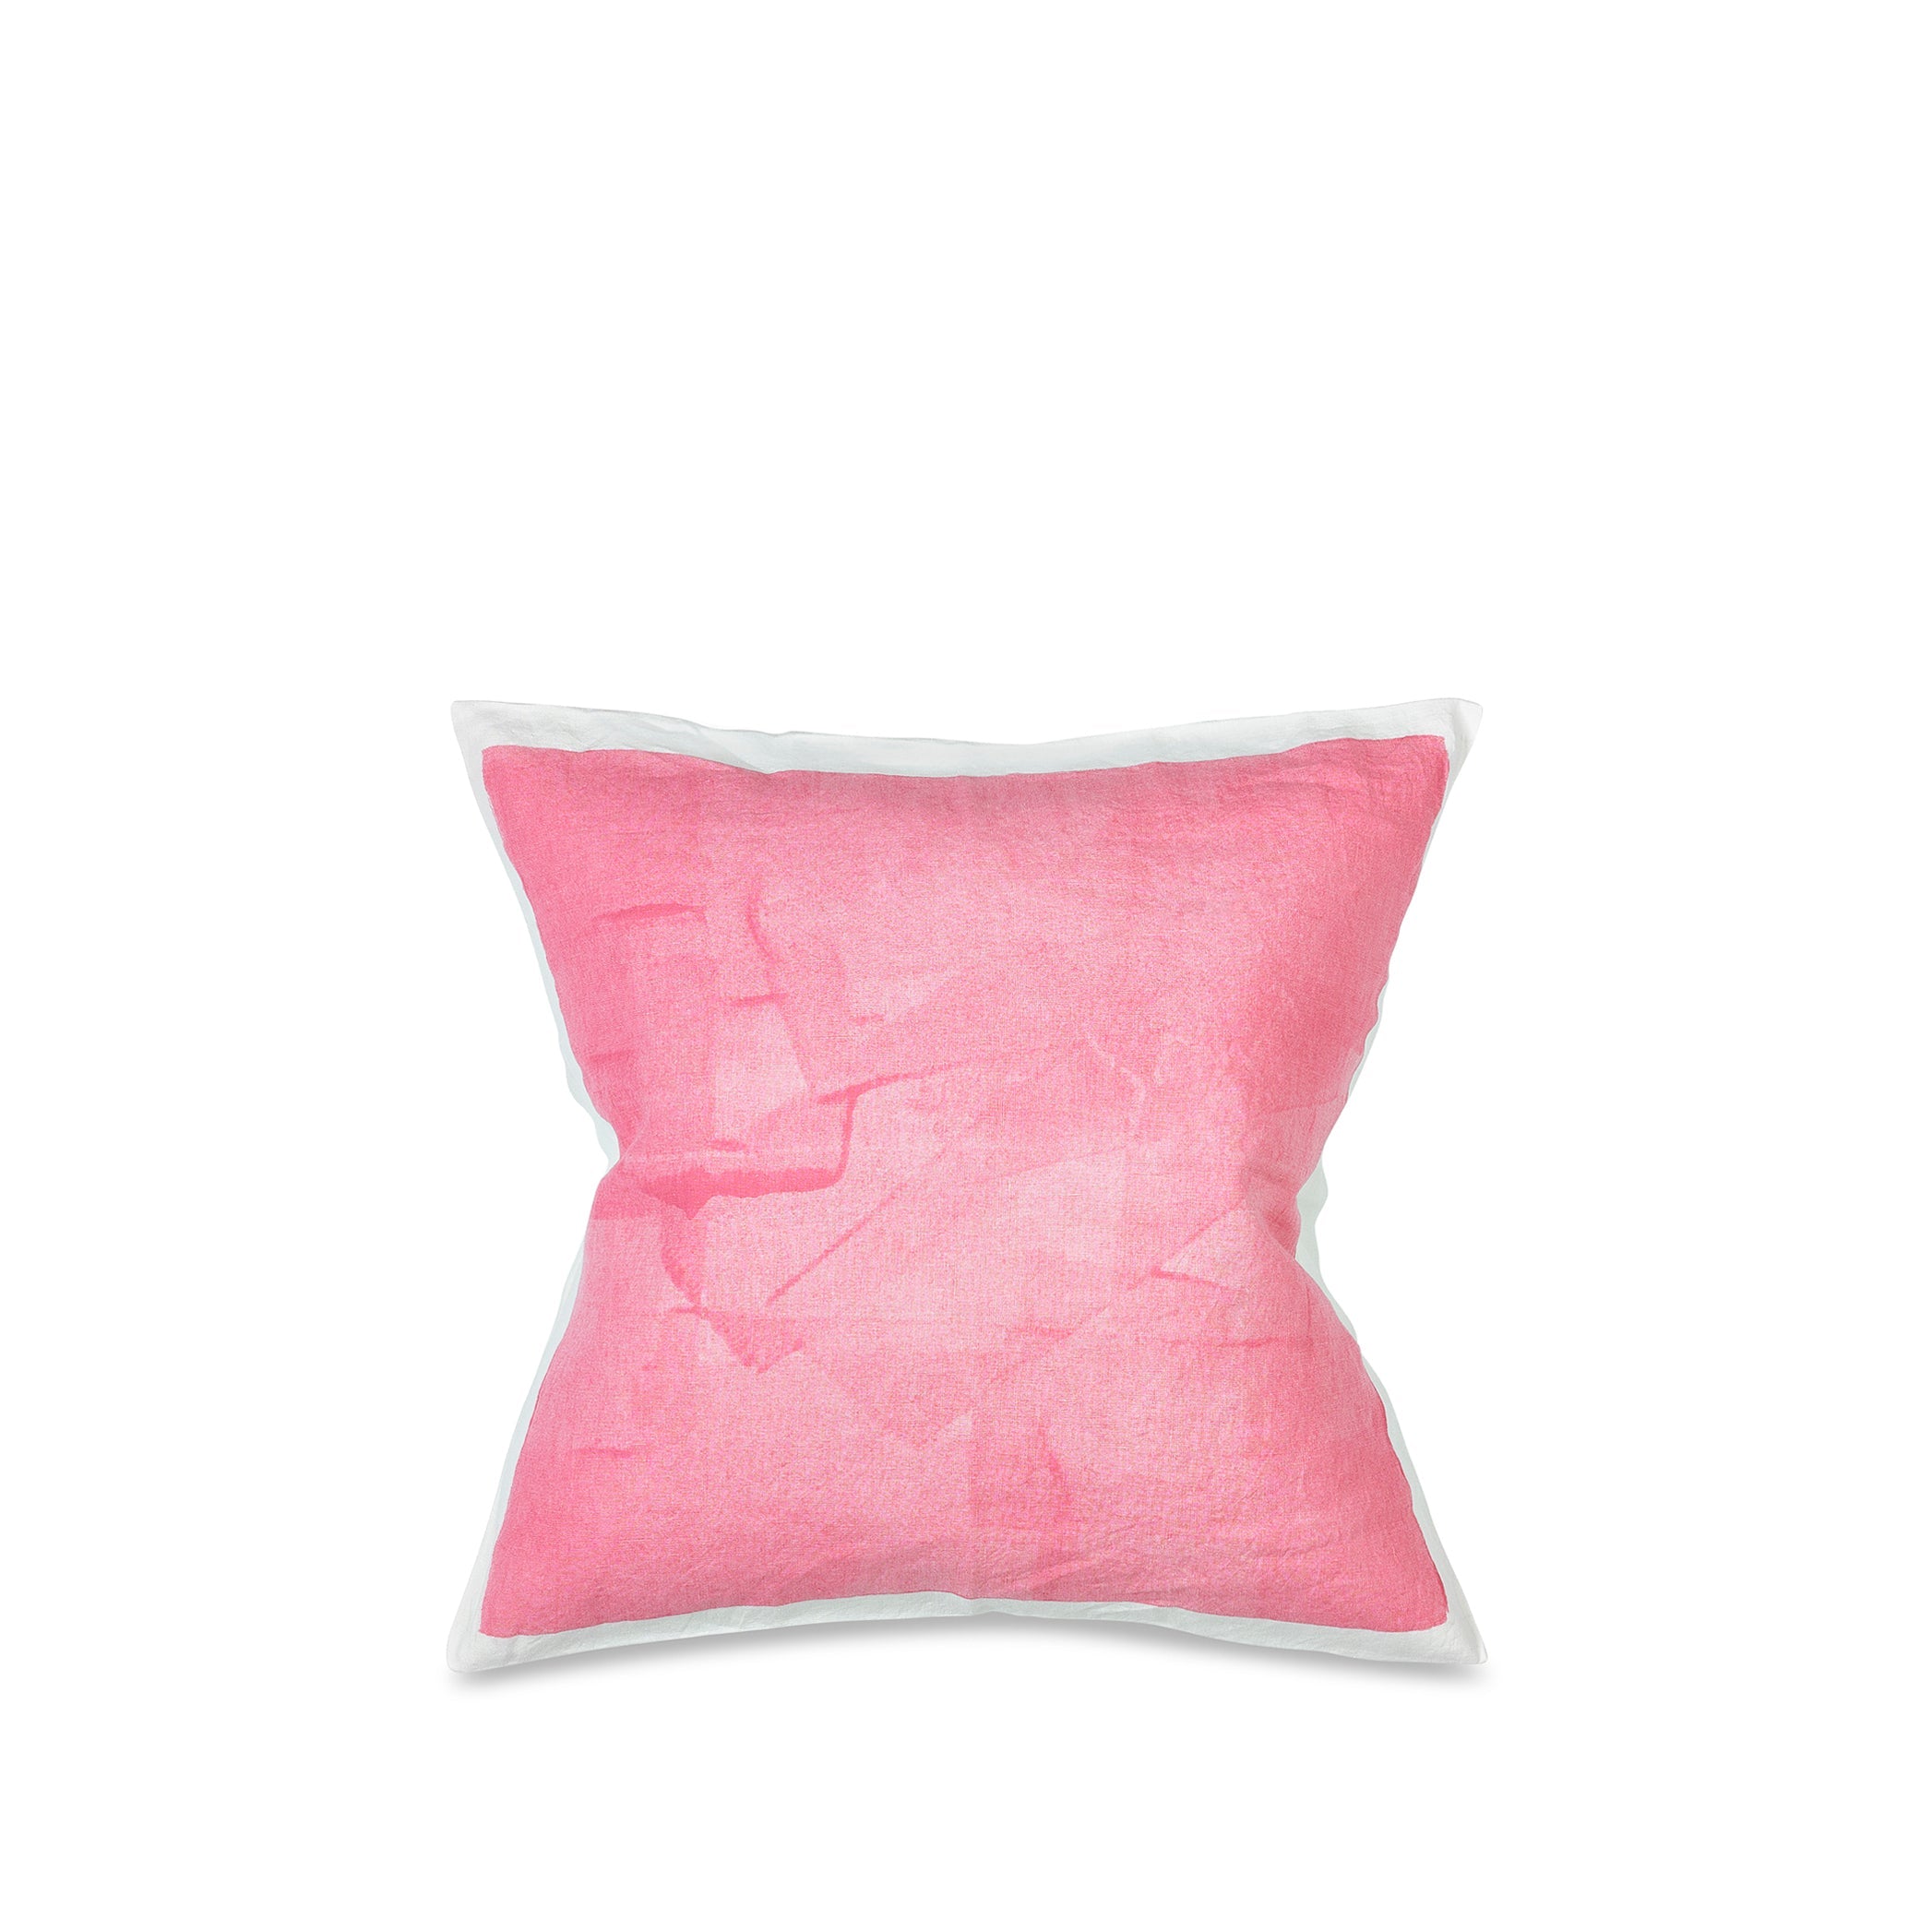 Hand Painted Linen Cushion in Rose Pink, 50cm x 50cm